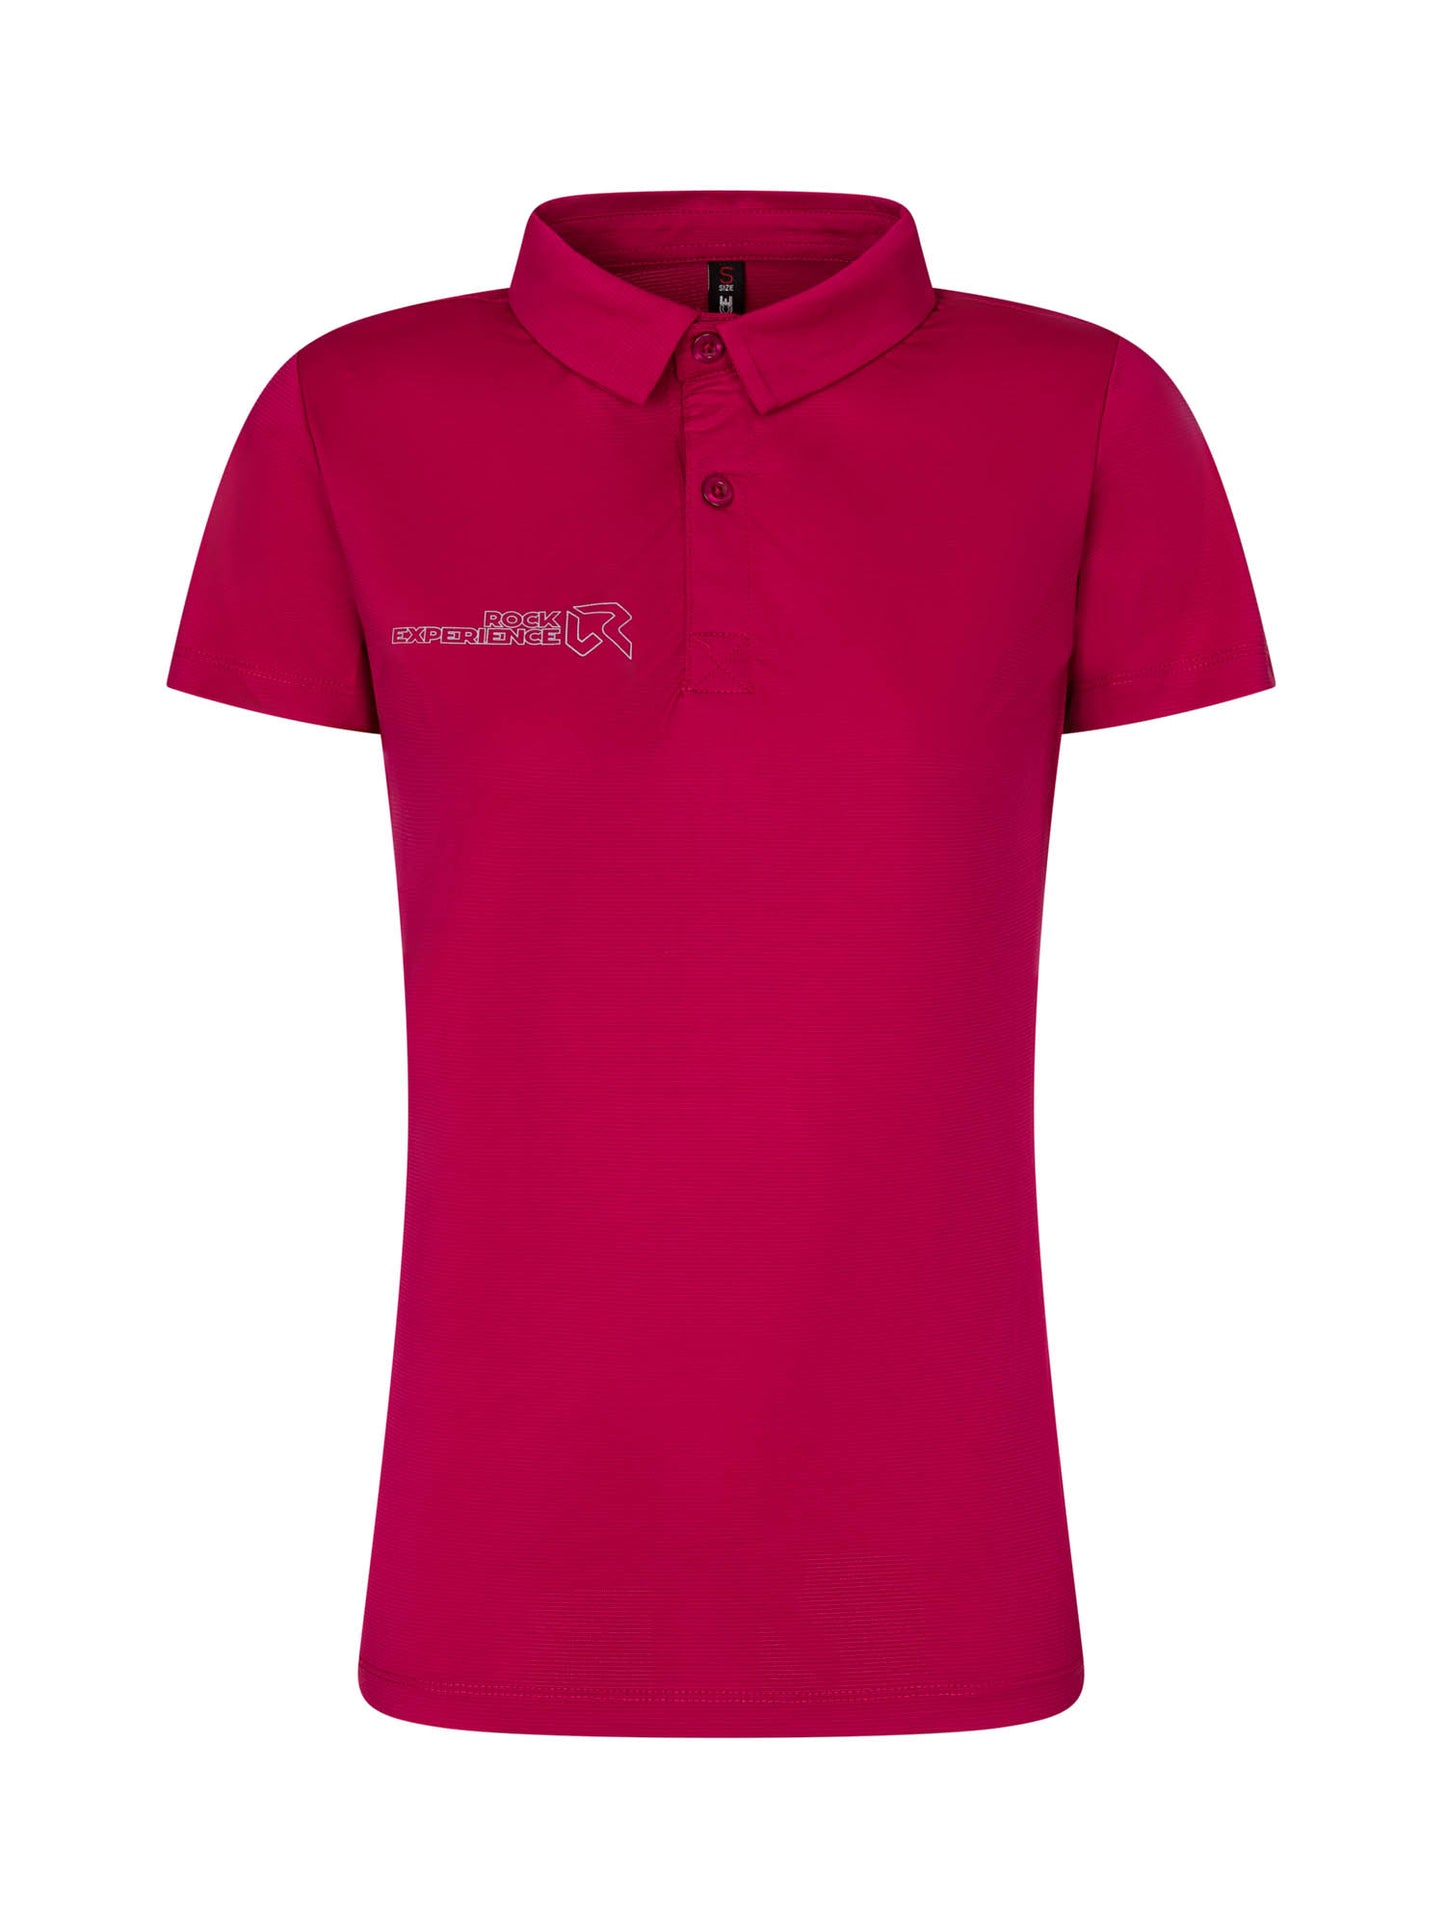 HAYES SS WOMAN POLO